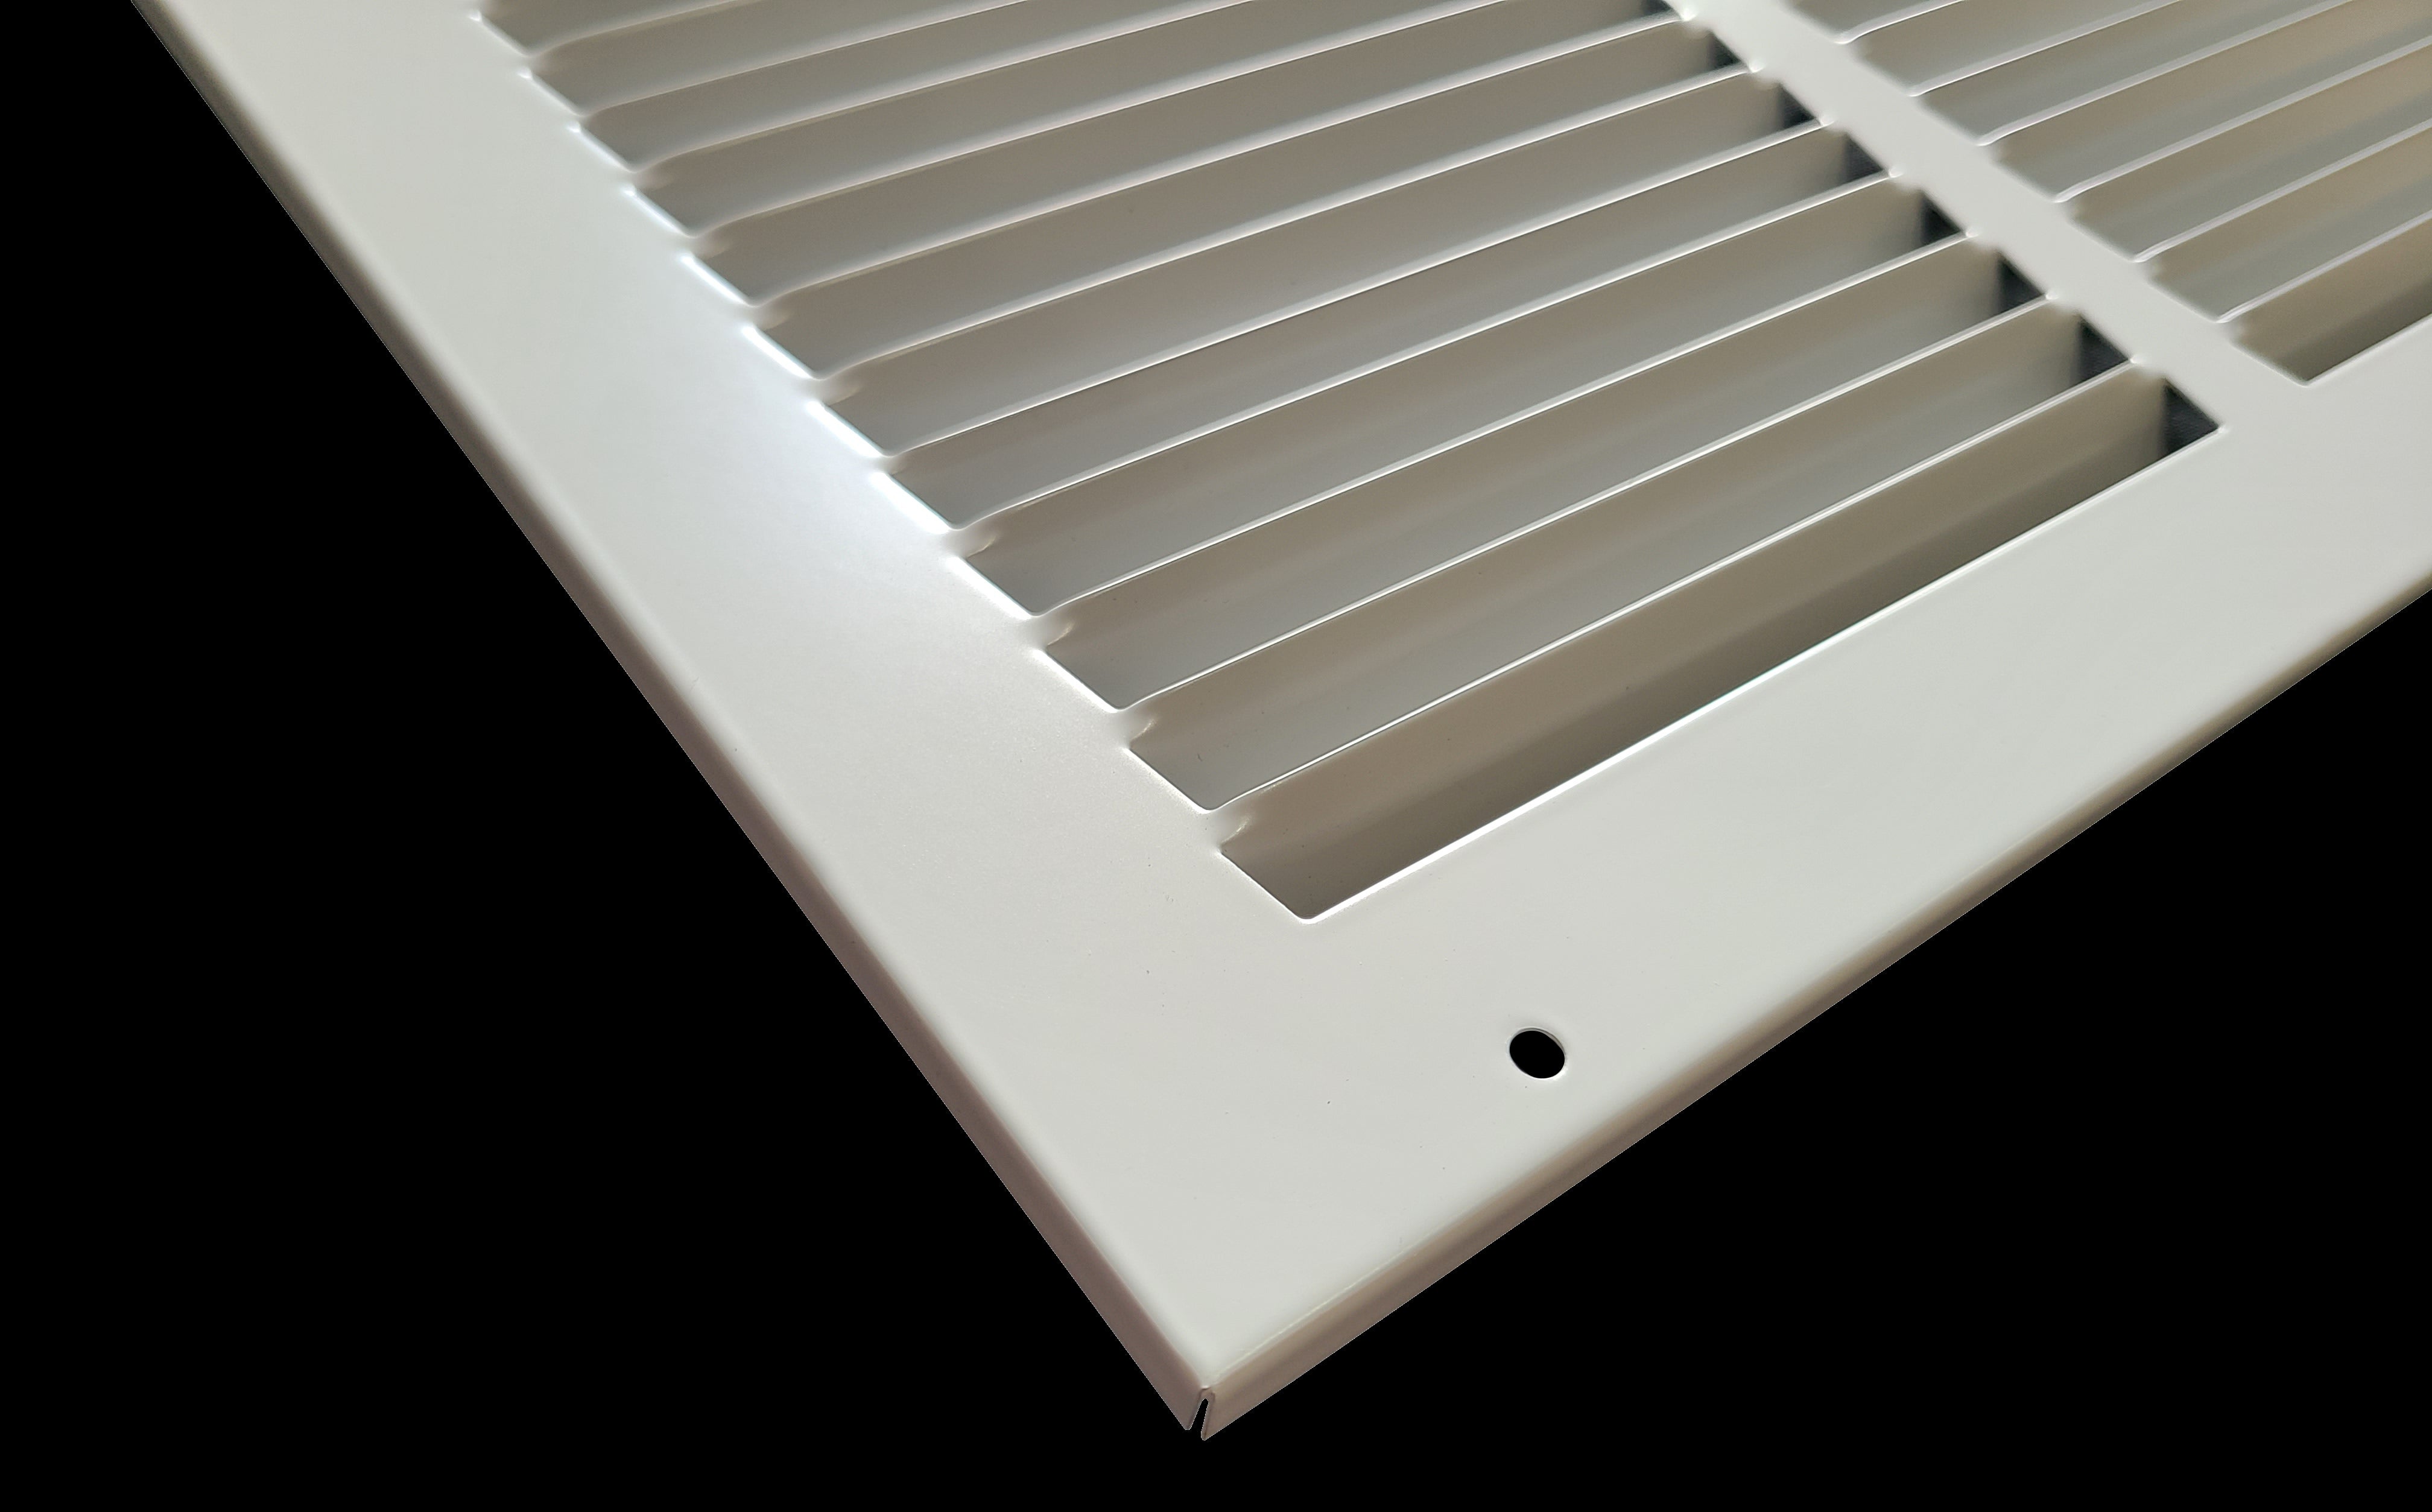 22" X 10" Duct Opening | Steel Return Air Grille for Sidewall and Ceiling | Outer Dimensions: 23.75"W X 11.75"H